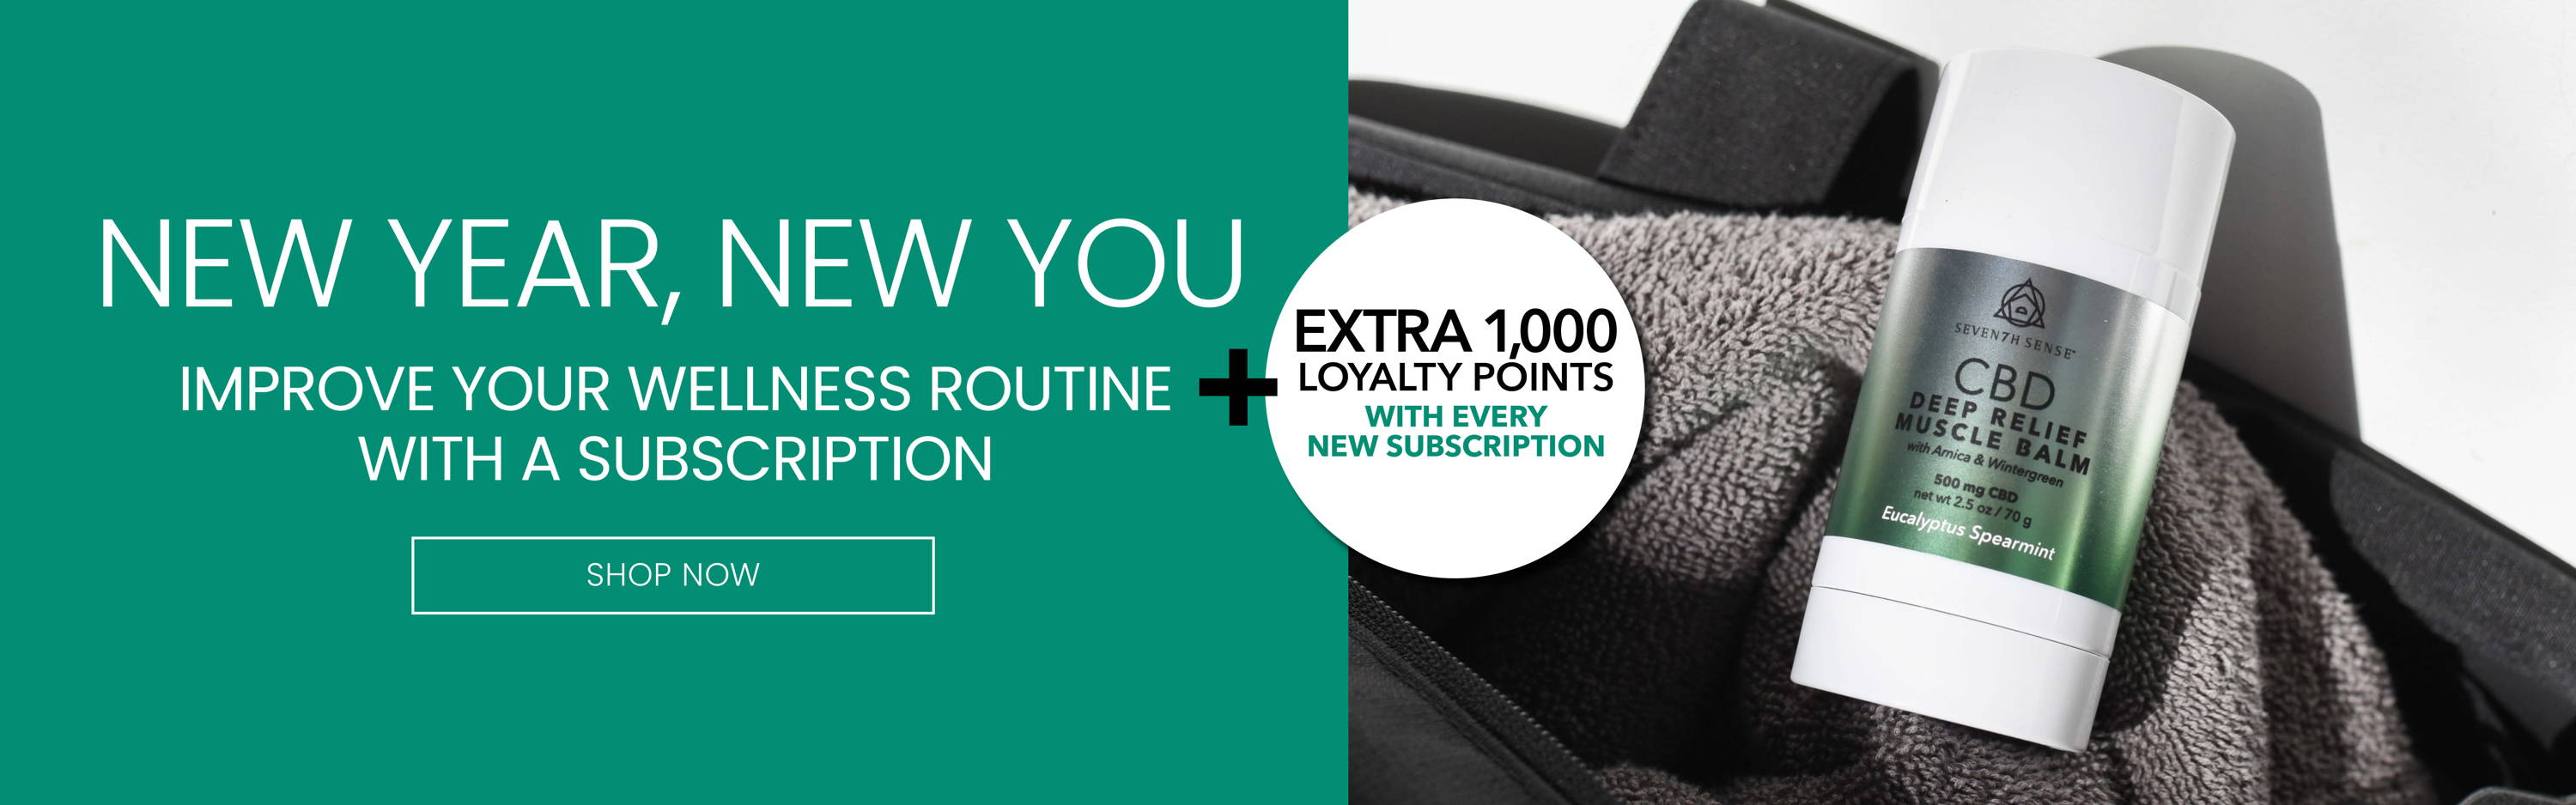 New Year, New You. Extra 1,000 Loyalty Points with Every New Subscription.